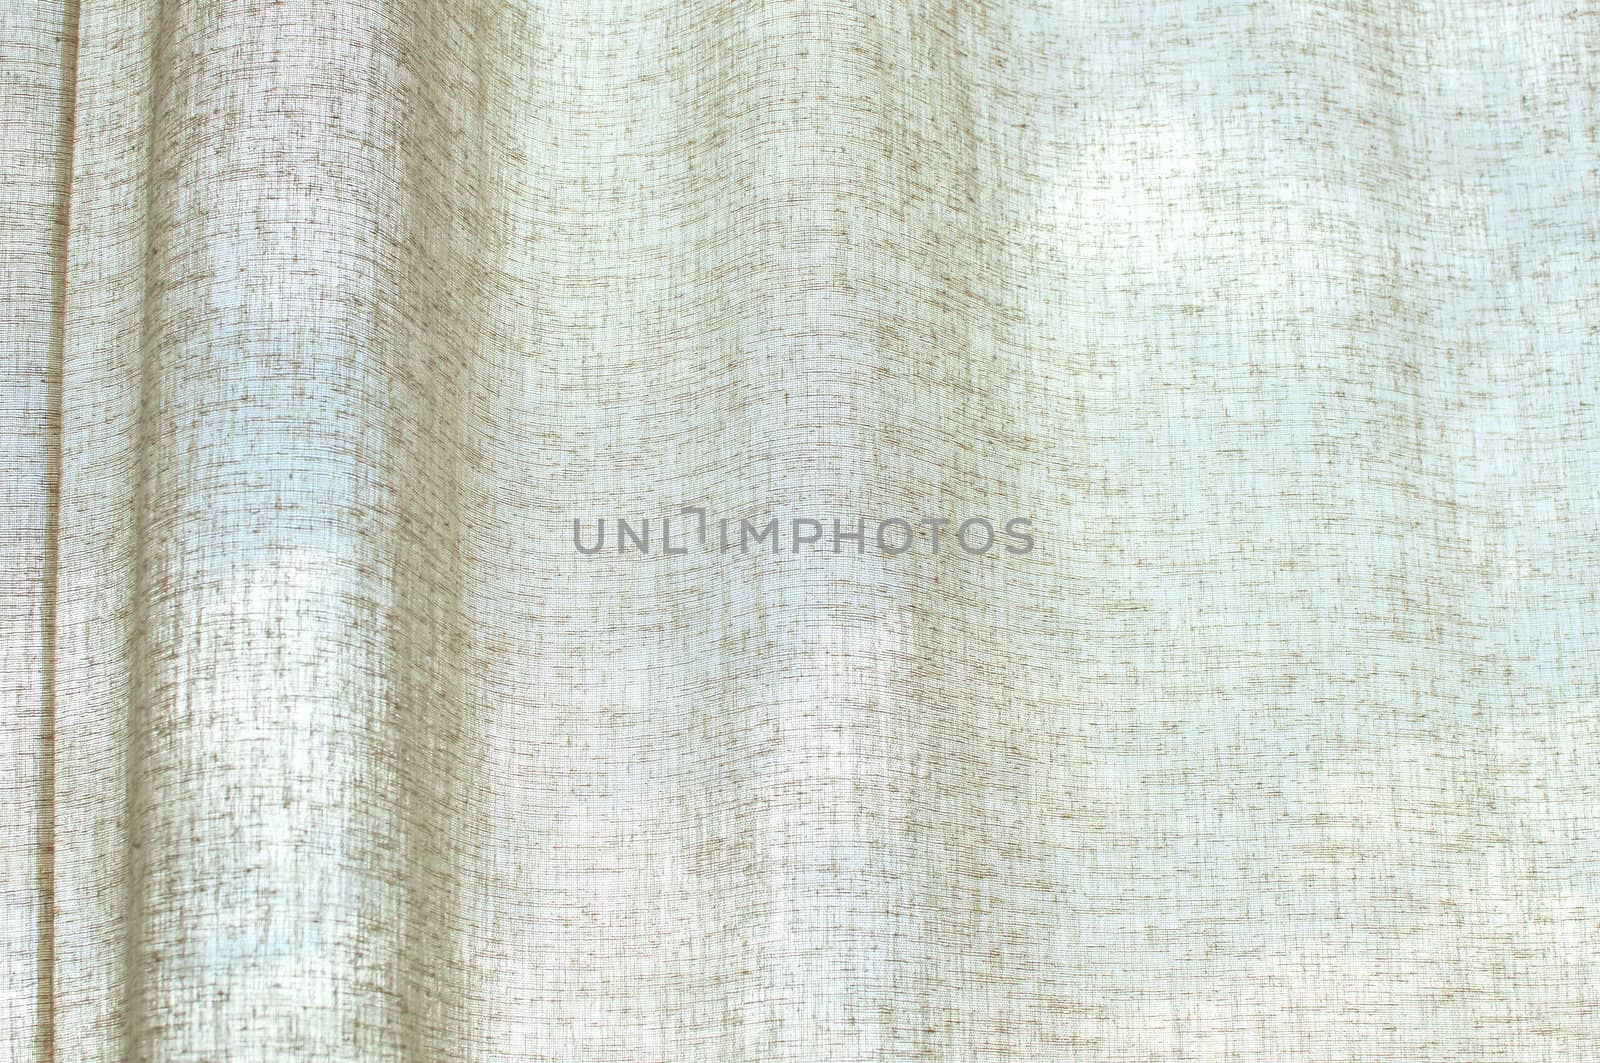 Detail of an interior curtain on translucent sky by TanawatPontchour